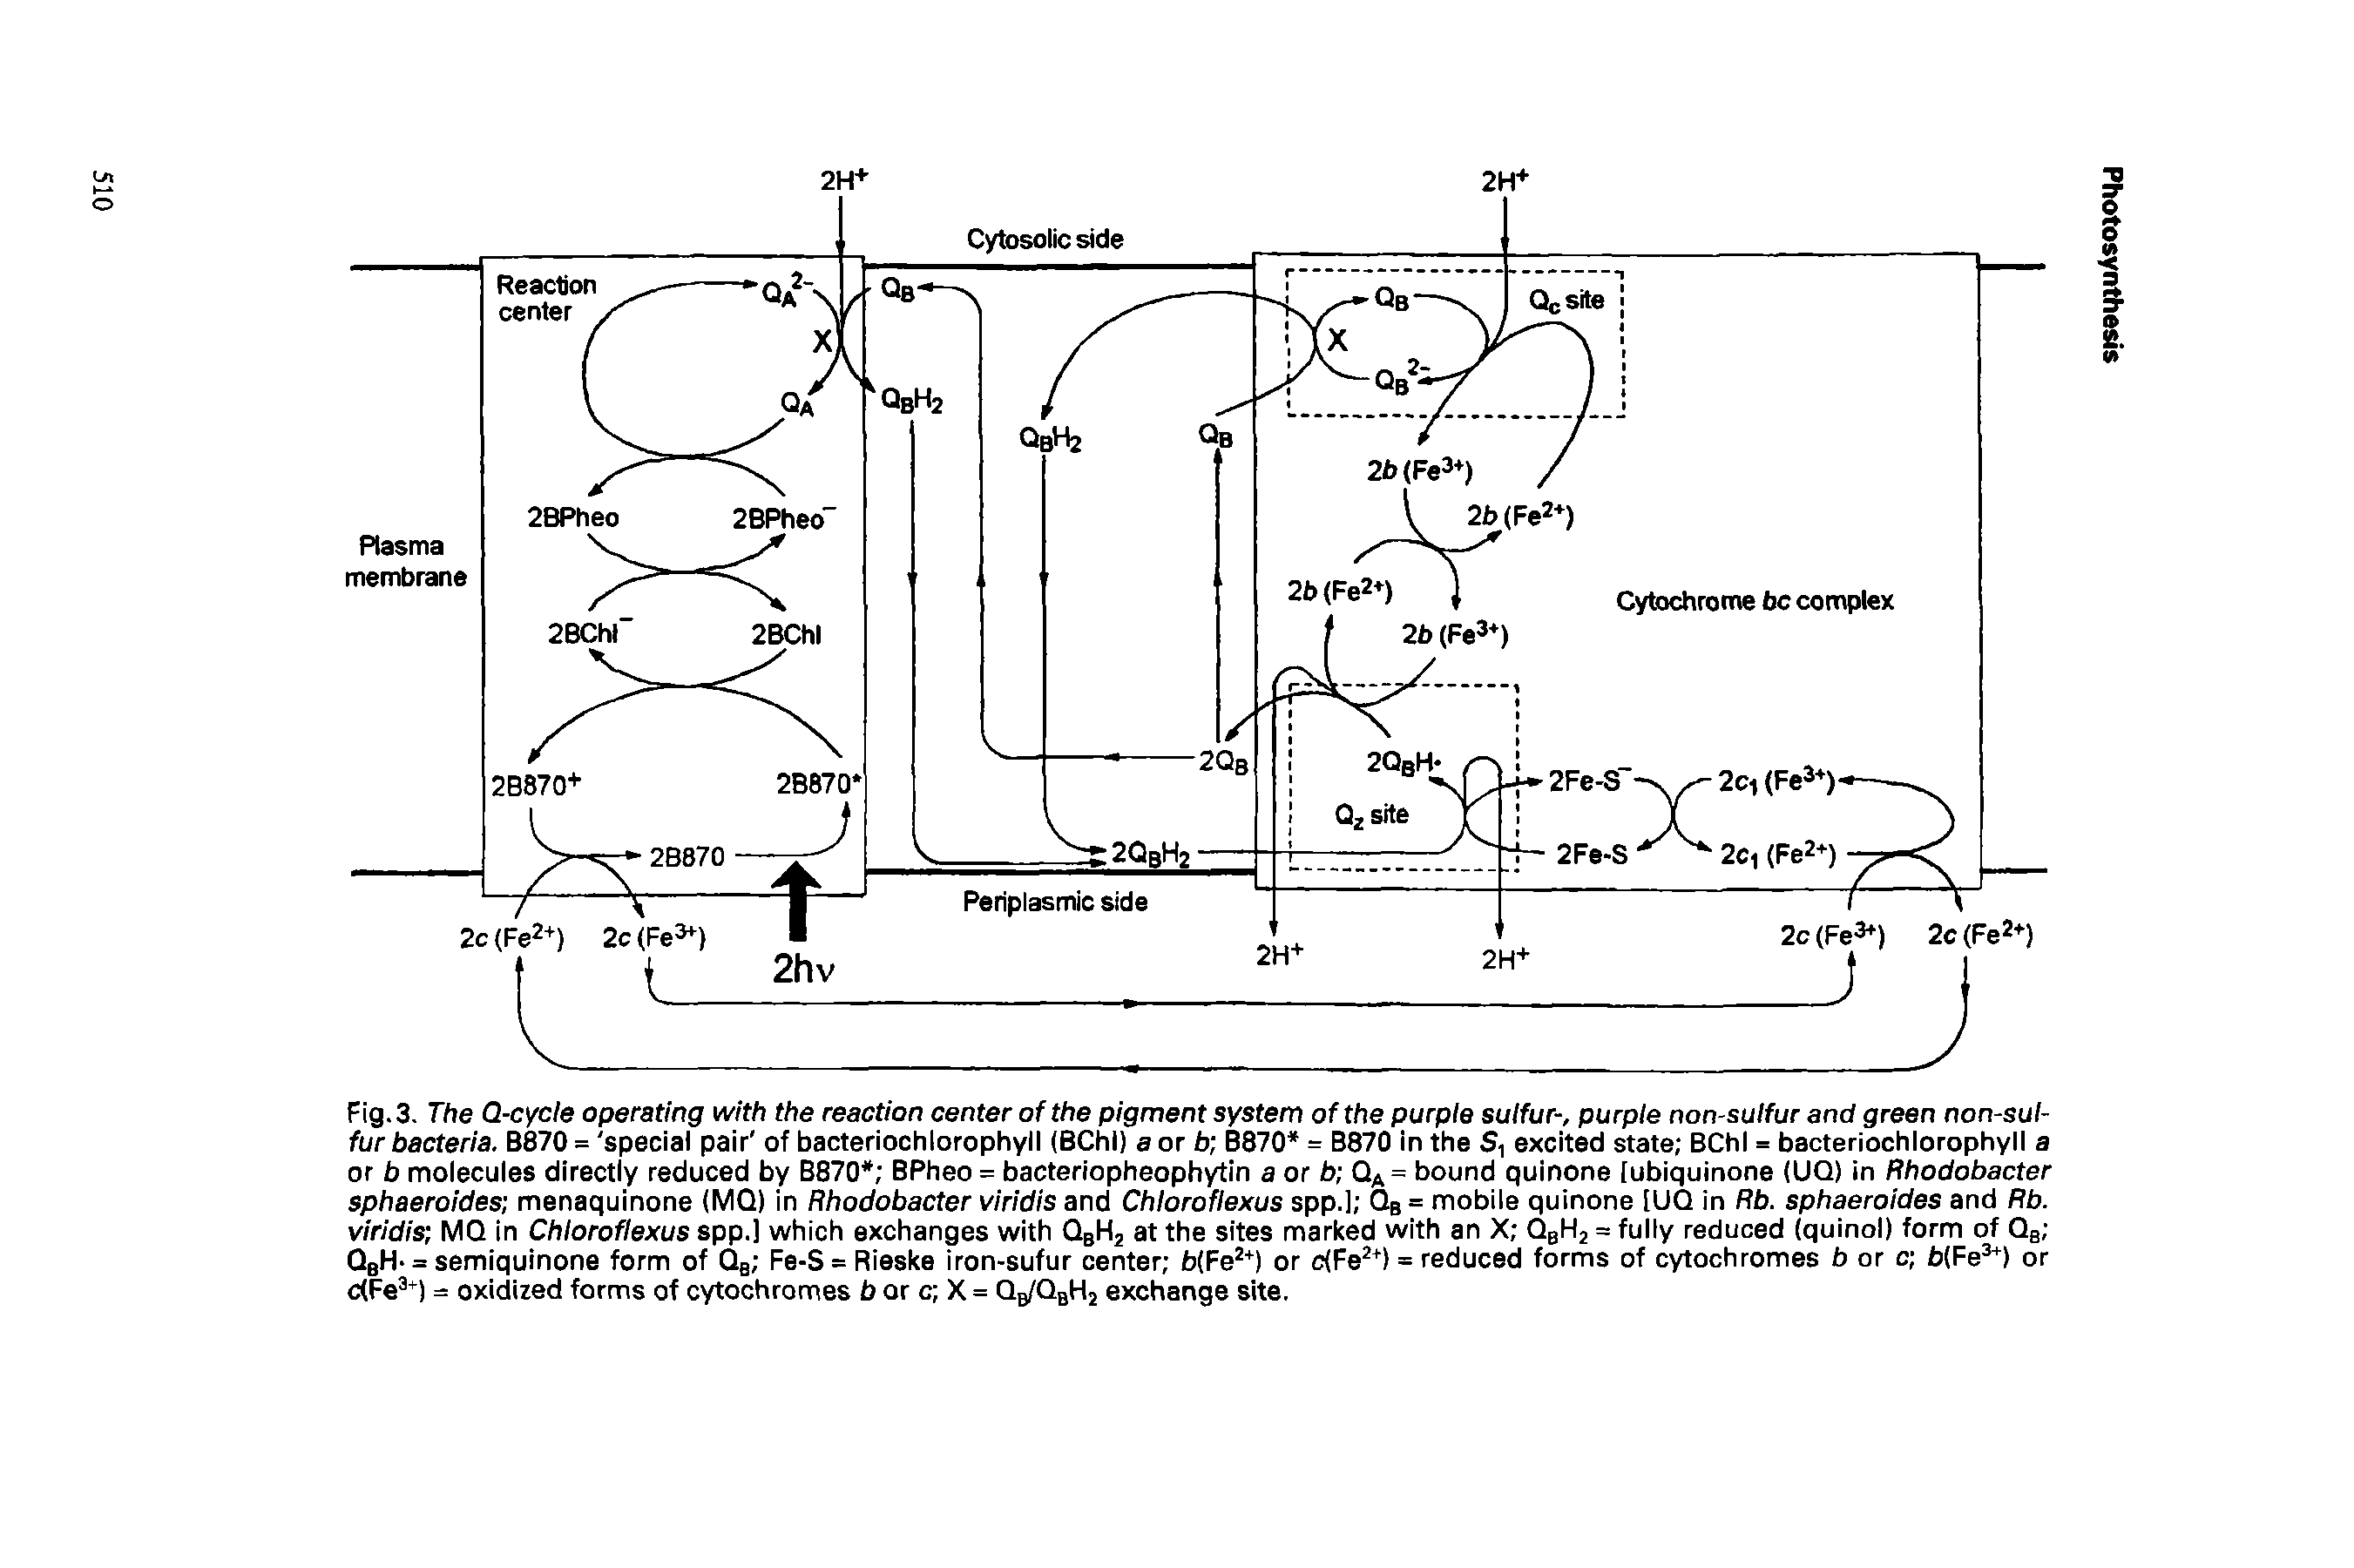 Fig. 3. The Q-cycle operating with the reaction center of the pigment system of the purple sulfur-, purple non-sulfur and green non-sulfur bacteria, B870 = special pair of bacteriochlorophyll (BChl) a or b B870 = B870 in the S, excited state BChl = bacteriochlorophyll a or b molecules directly reduced by B870 BPheo = bacteriopheophytin a or b Q = bound quinone [ubiquinone (UQ) in Rhodobacter sphaeroides menaquinone (MQ) in Rhodobacter viridis and Chloroflexus spp.l Qb = mobile quinone [UQ in Rb. sphaeroides and Rb. virldis MQ in Chloroflexus spp.l which exchanges with QbHj at the sites marked with an X QbHj = fully reduced (quinol) form of Qg QbH- = semiquinone form of Qb Fe-S = Rieske iron-sufur center b(Fe ) or c(Fe +) = reduced forms of cytochromes b or o b(Fe ) or c(Fe ) = oxidized forms of cytochromes b or c X = Qb/QbH2 exchange site.